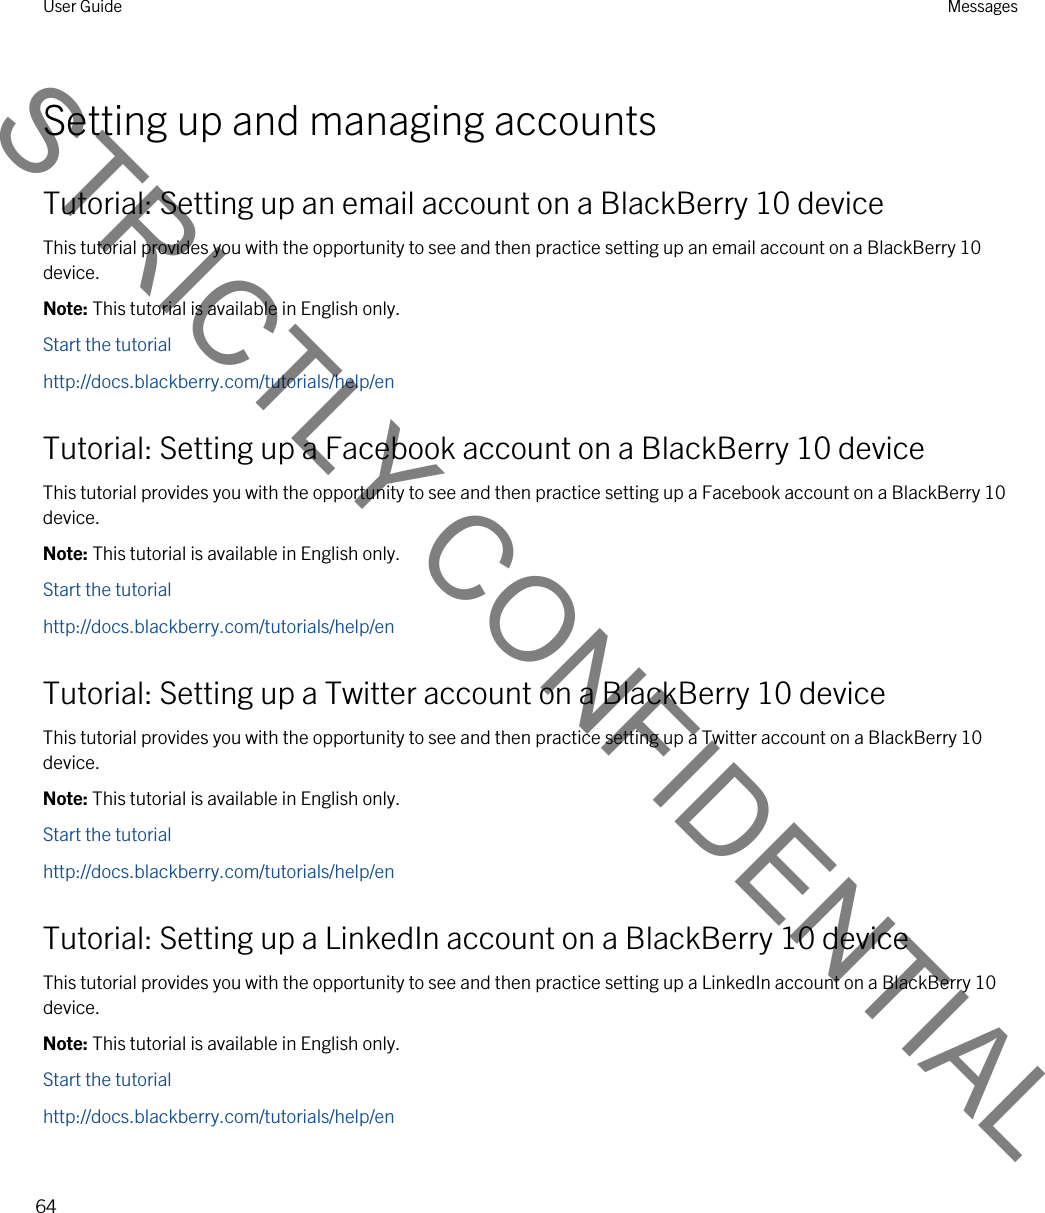 Setting up and managing accountsTutorial: Setting up an email account on a BlackBerry 10 deviceThis tutorial provides you with the opportunity to see and then practice setting up an email account on a BlackBerry 10 device.Note: This tutorial is available in English only.Start the tutorialhttp://docs.blackberry.com/tutorials/help/enTutorial: Setting up a Facebook account on a BlackBerry 10 deviceThis tutorial provides you with the opportunity to see and then practice setting up a Facebook account on a BlackBerry 10 device.Note: This tutorial is available in English only.Start the tutorialhttp://docs.blackberry.com/tutorials/help/enTutorial: Setting up a Twitter account on a BlackBerry 10 deviceThis tutorial provides you with the opportunity to see and then practice setting up a Twitter account on a BlackBerry 10 device.Note: This tutorial is available in English only.Start the tutorialhttp://docs.blackberry.com/tutorials/help/enTutorial: Setting up a LinkedIn account on a BlackBerry 10 deviceThis tutorial provides you with the opportunity to see and then practice setting up a LinkedIn account on a BlackBerry 10 device.Note: This tutorial is available in English only.Start the tutorialhttp://docs.blackberry.com/tutorials/help/enUser Guide Messages64STRICTLY CONFIDENTIAL